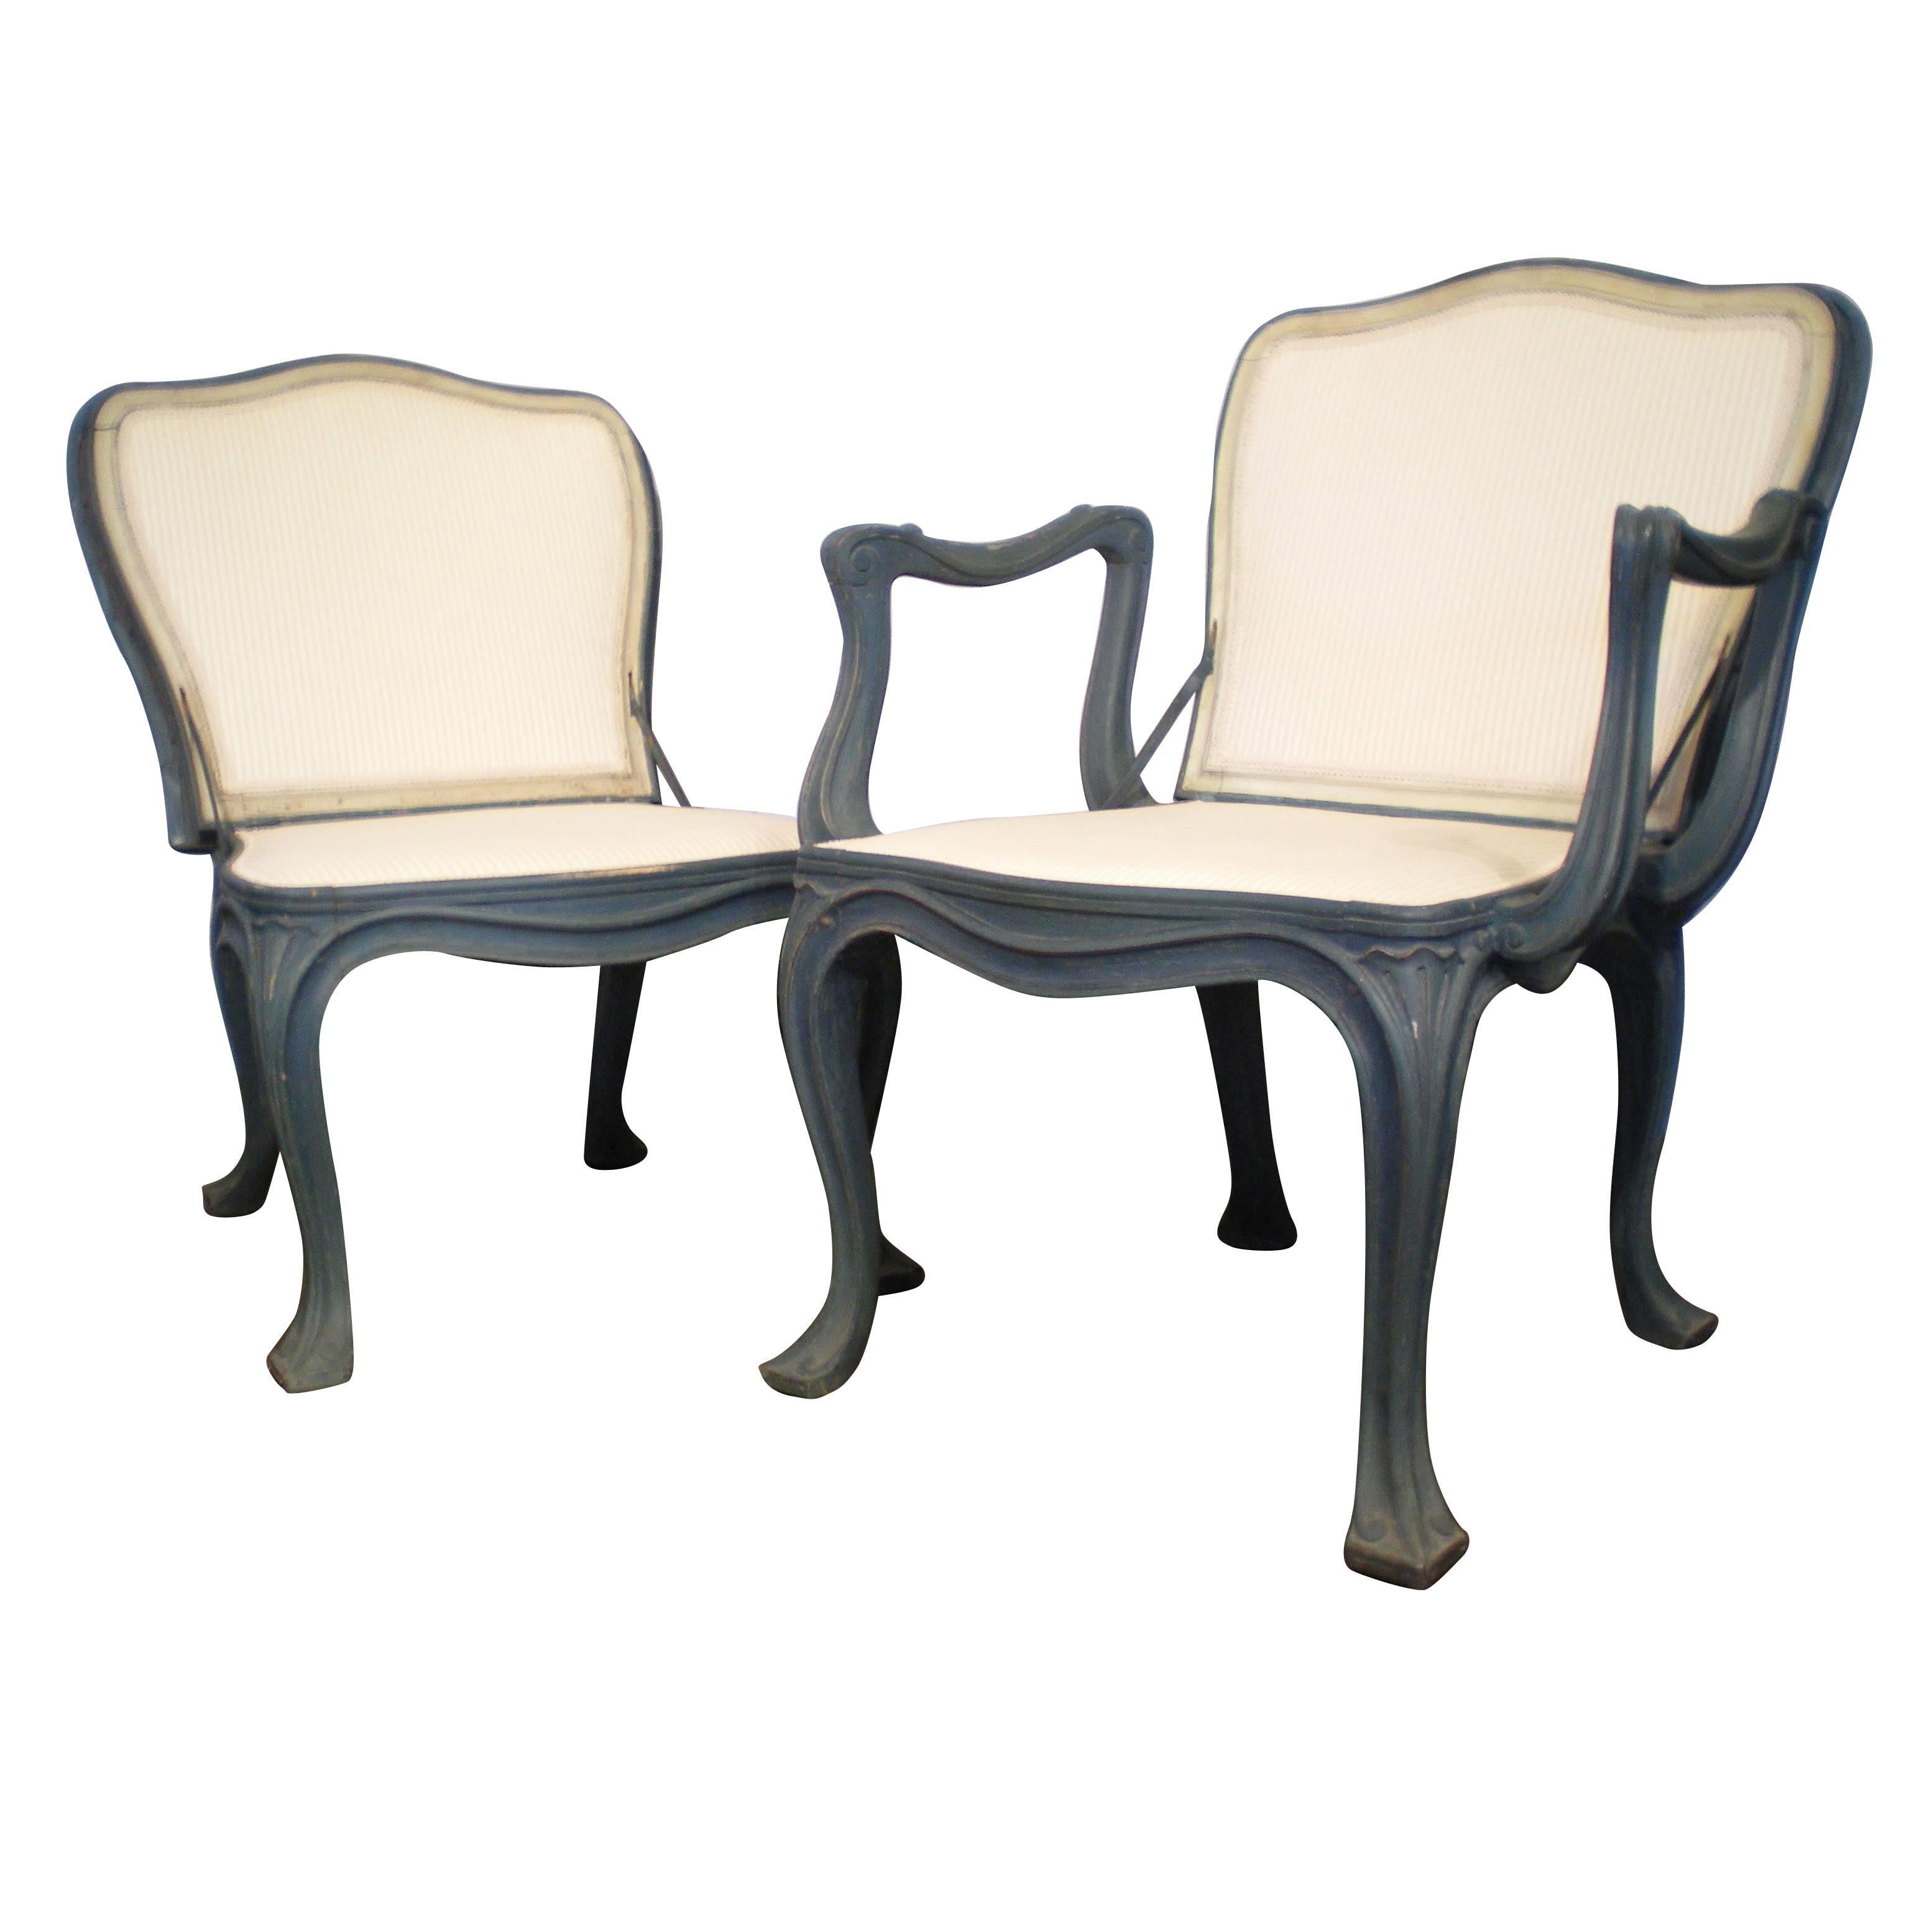 French Garden Chairs For Sale